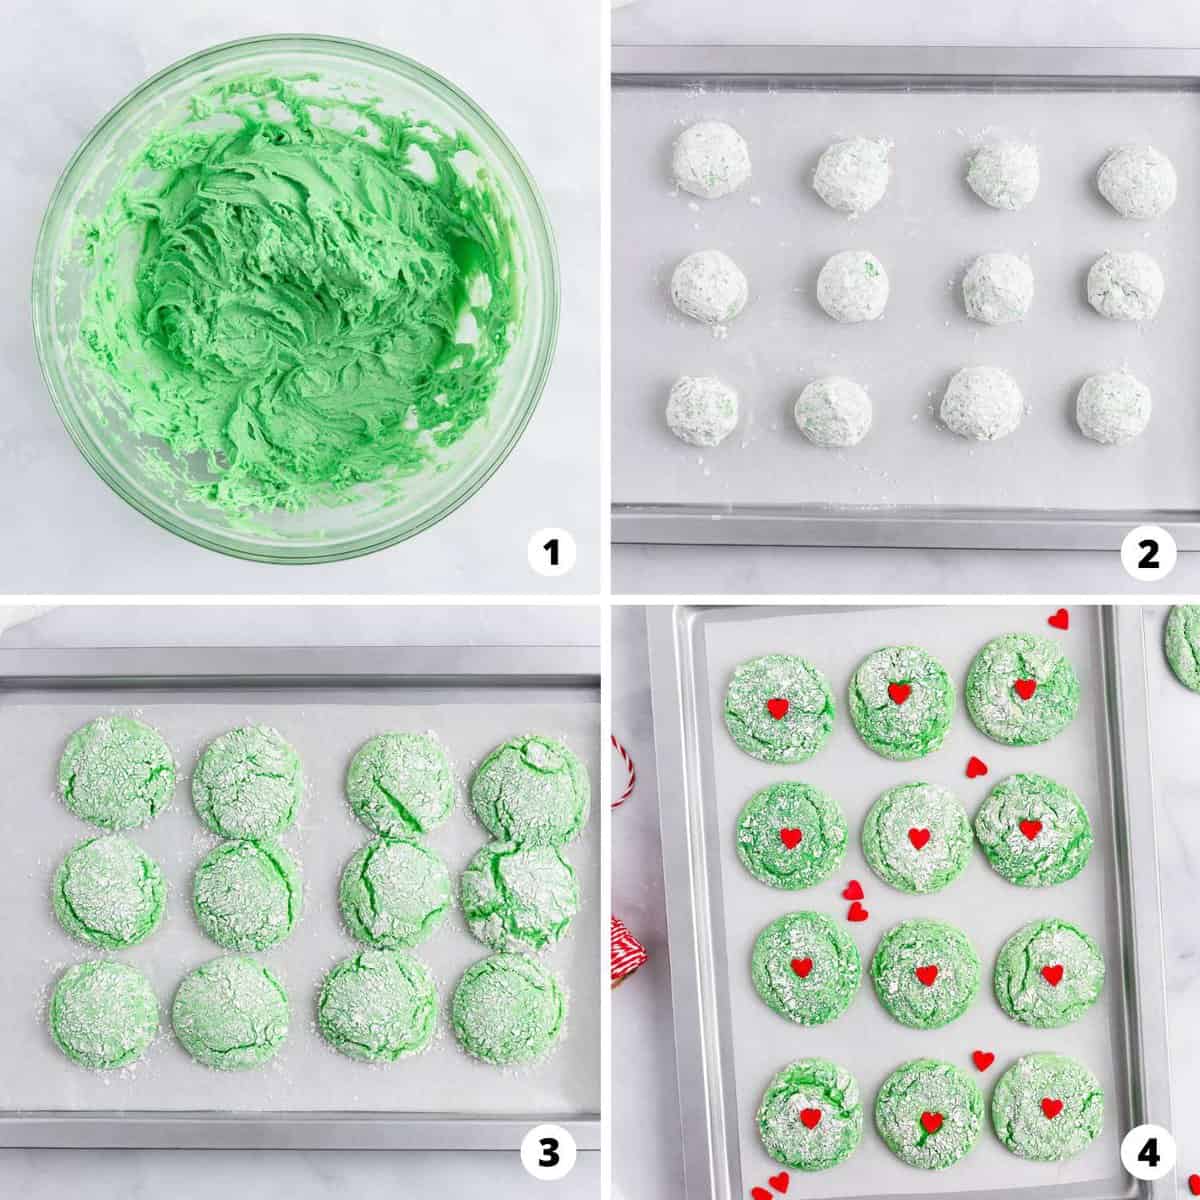 Showing how to make grinch cookies in a 4 step collage.